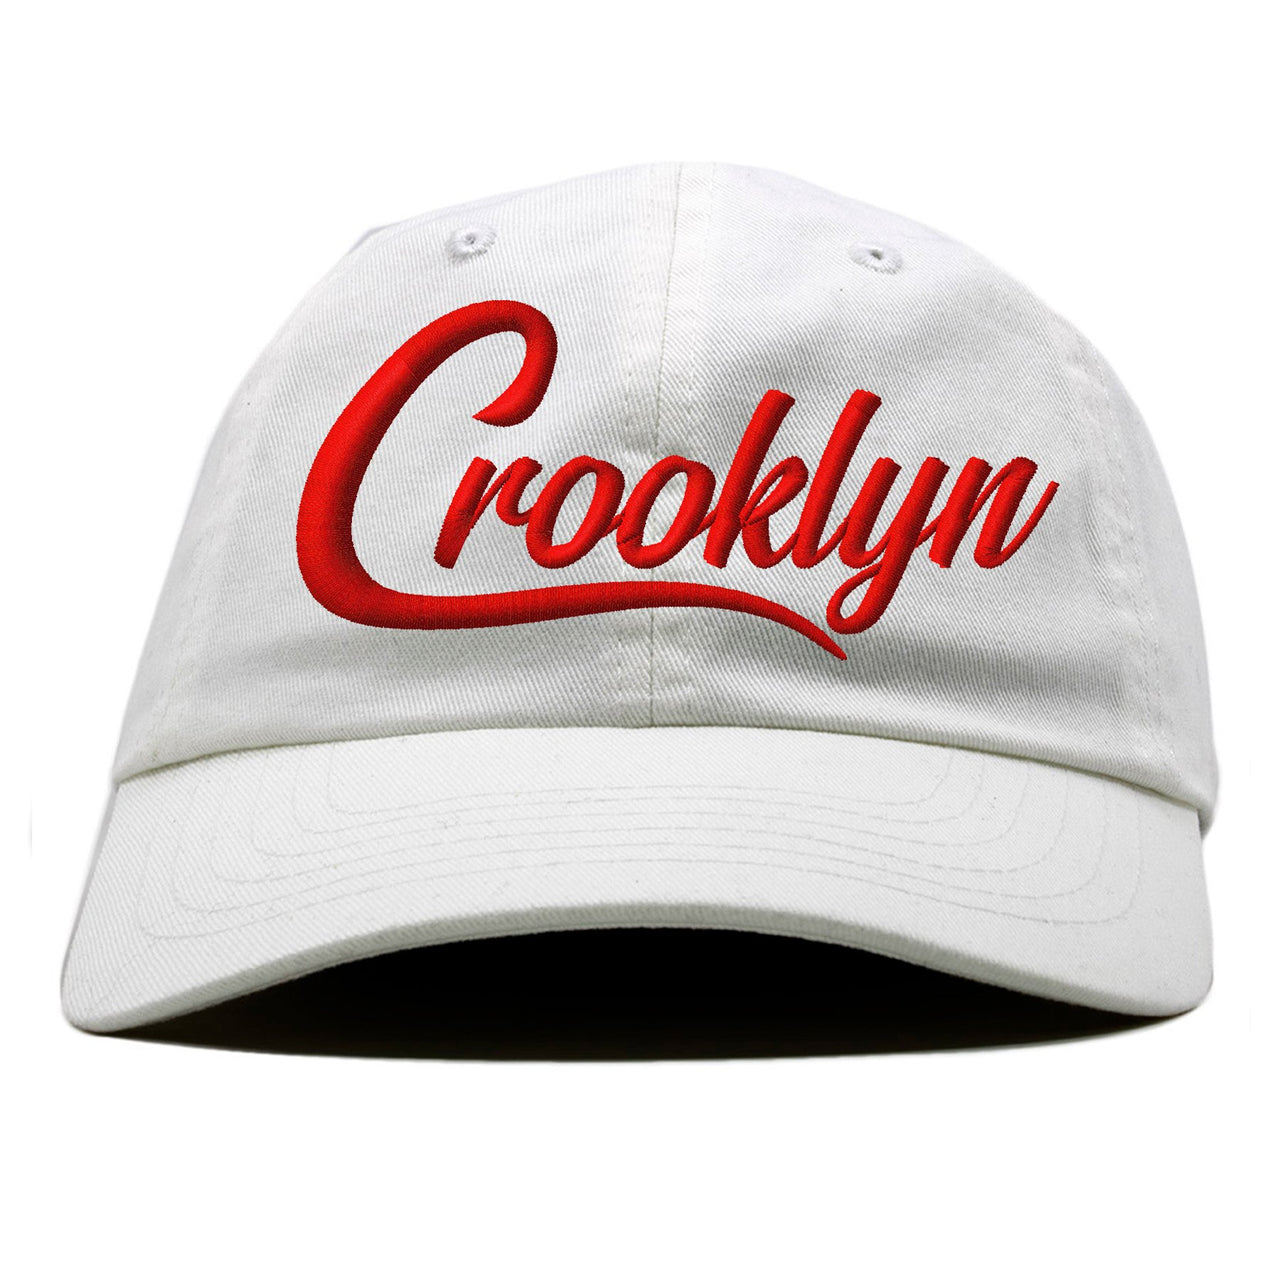 White University Red Pluses Dad Hat | Crooklyn, White